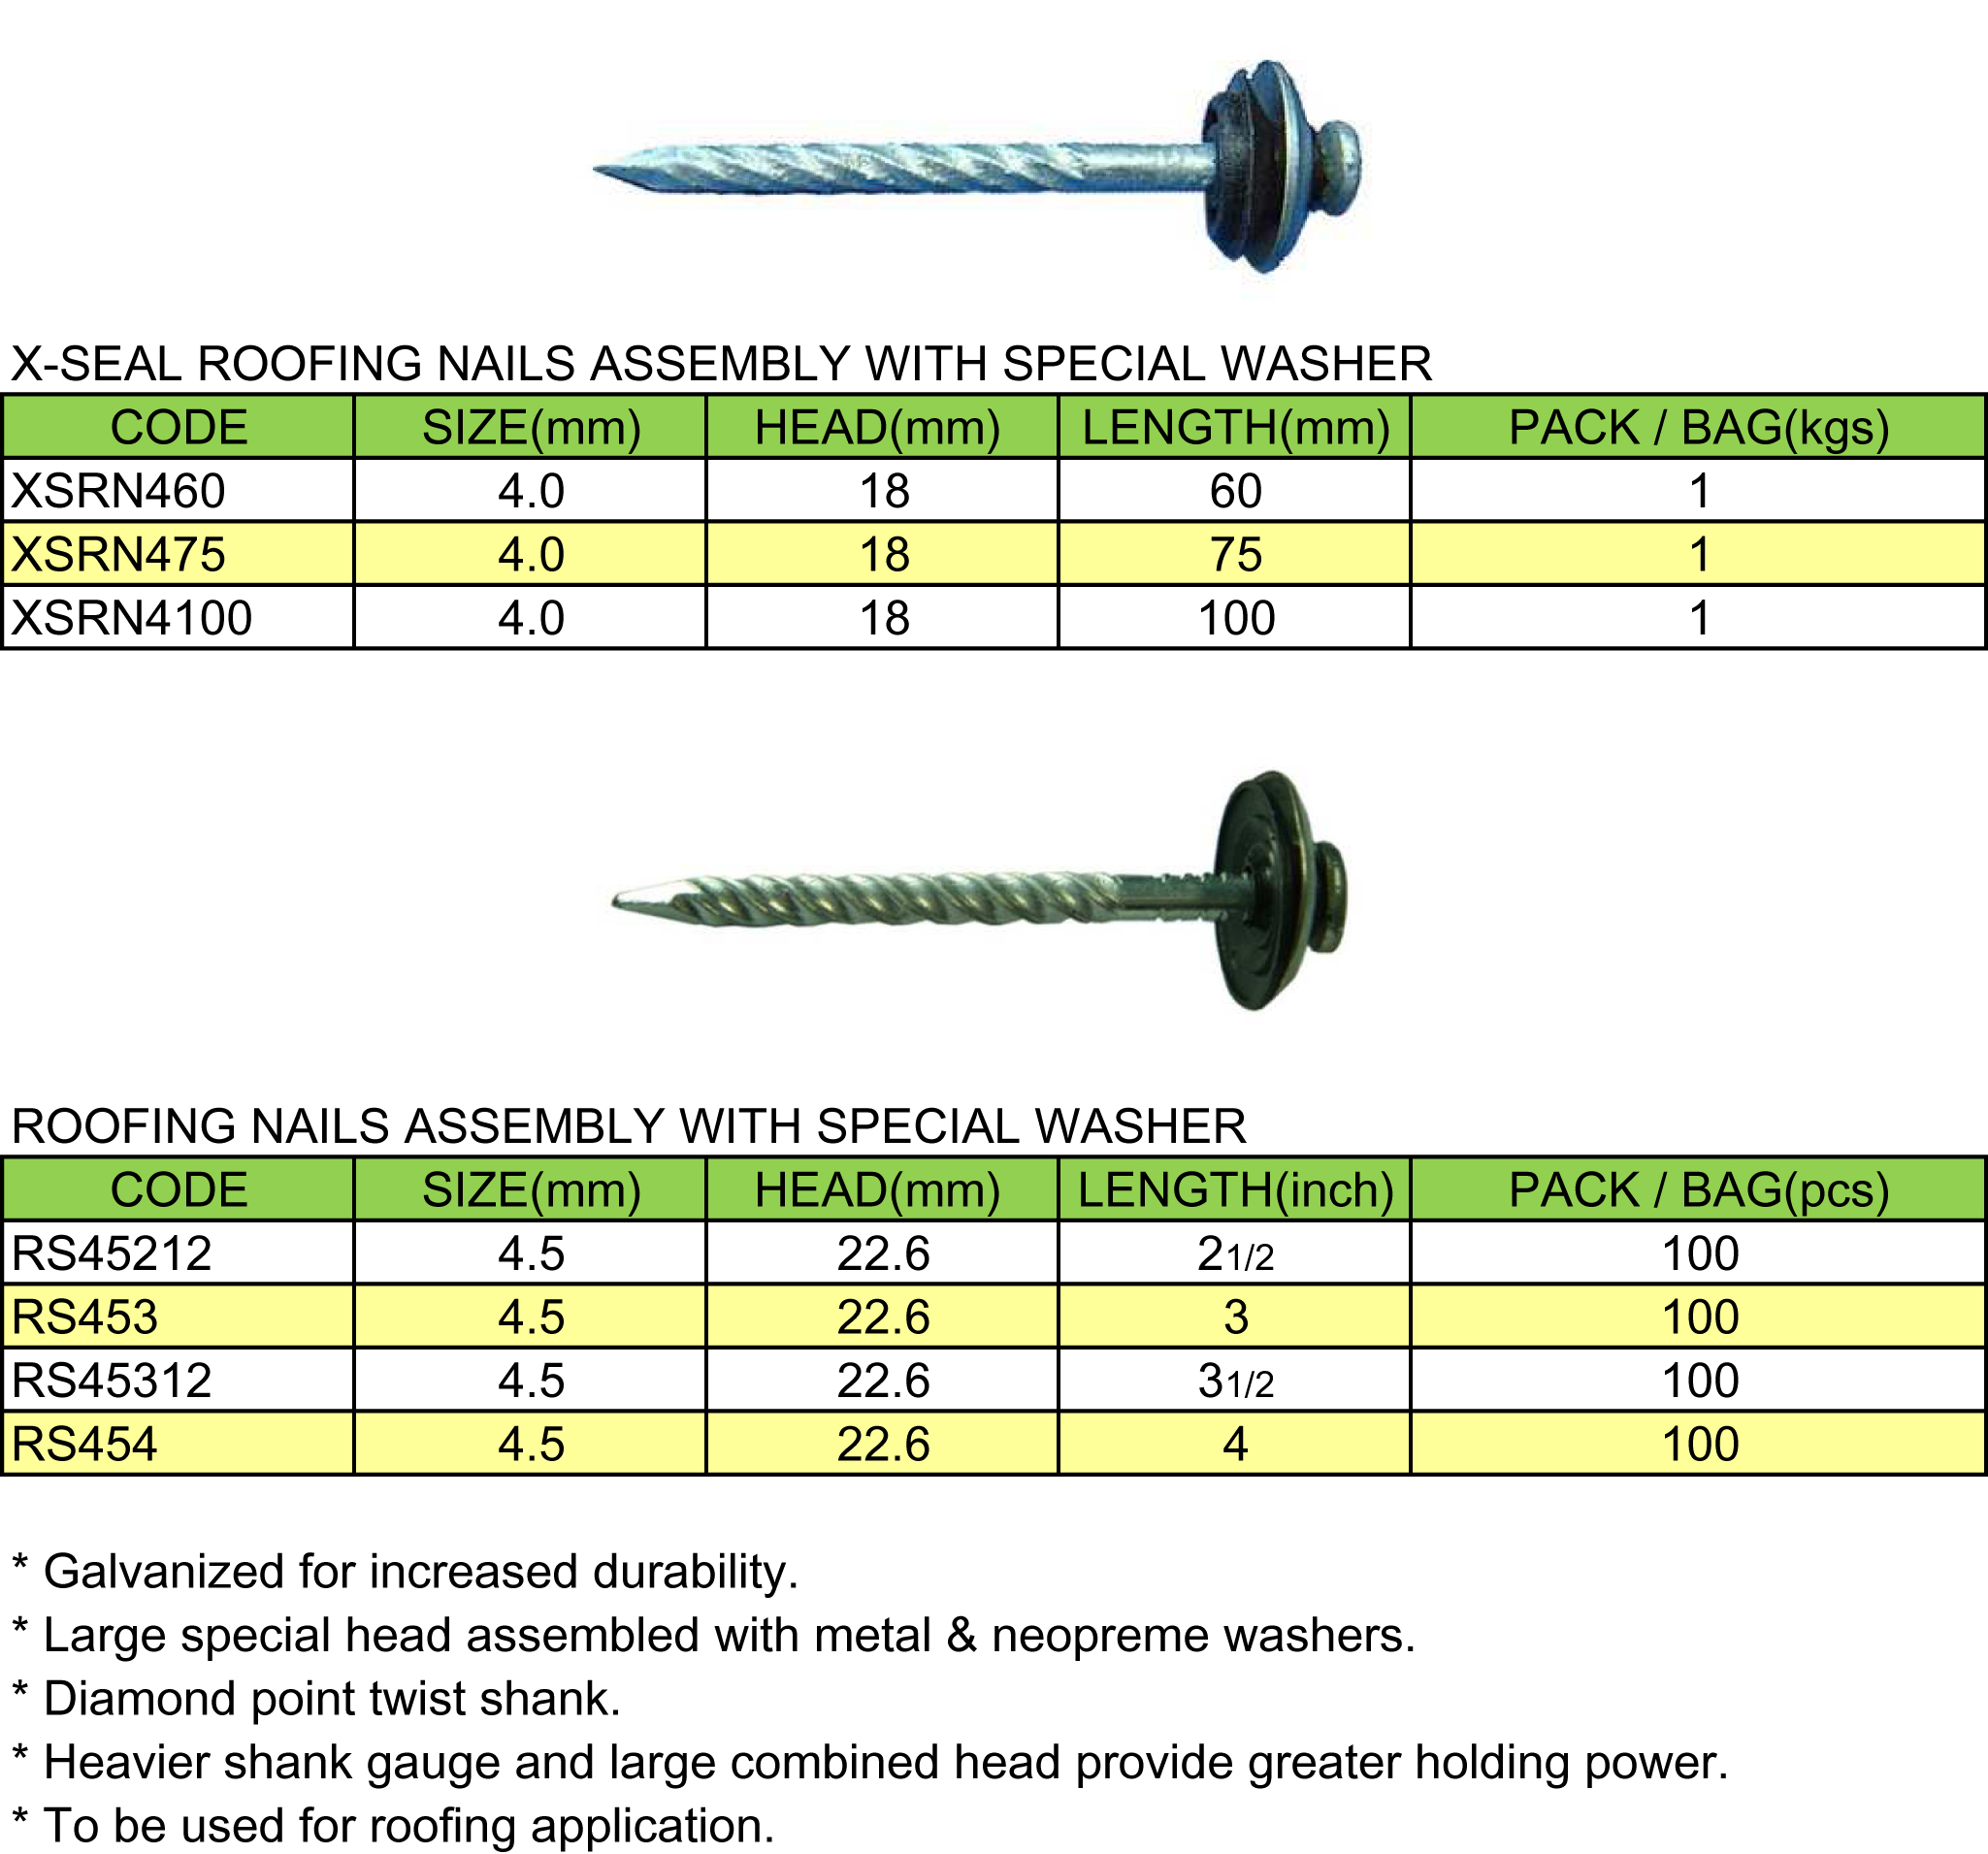 Roofing Nails with Special Washer(图1)